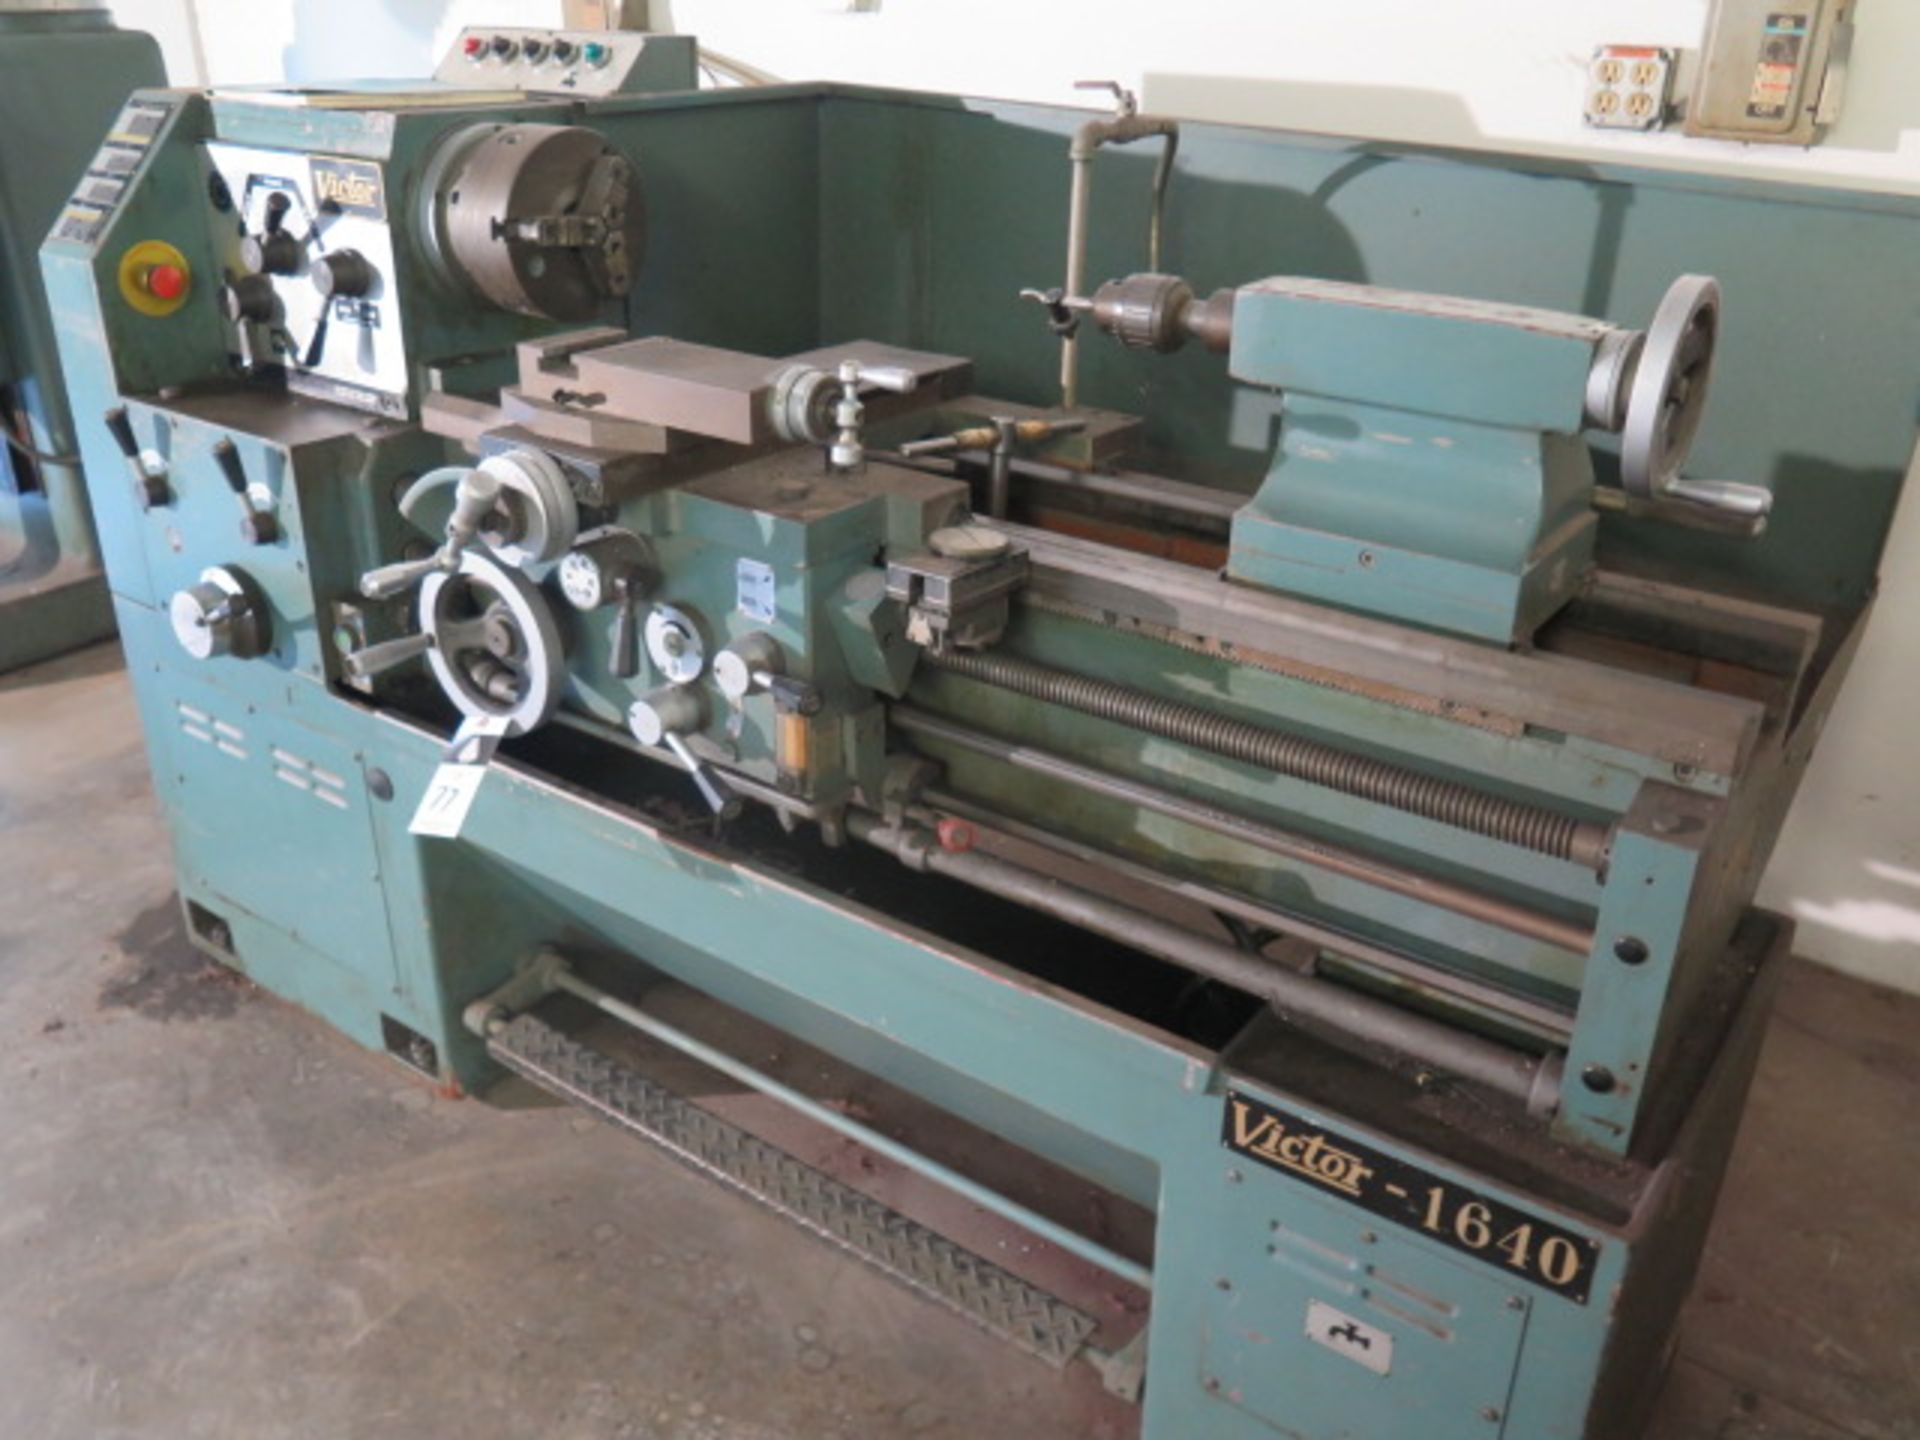 Victor 1640G 16” x 40” Geared Head Gap Lathe s/n 563210 w/ 30-1800 RPM, In/mm Threading, SOLD AS IS - Image 2 of 19